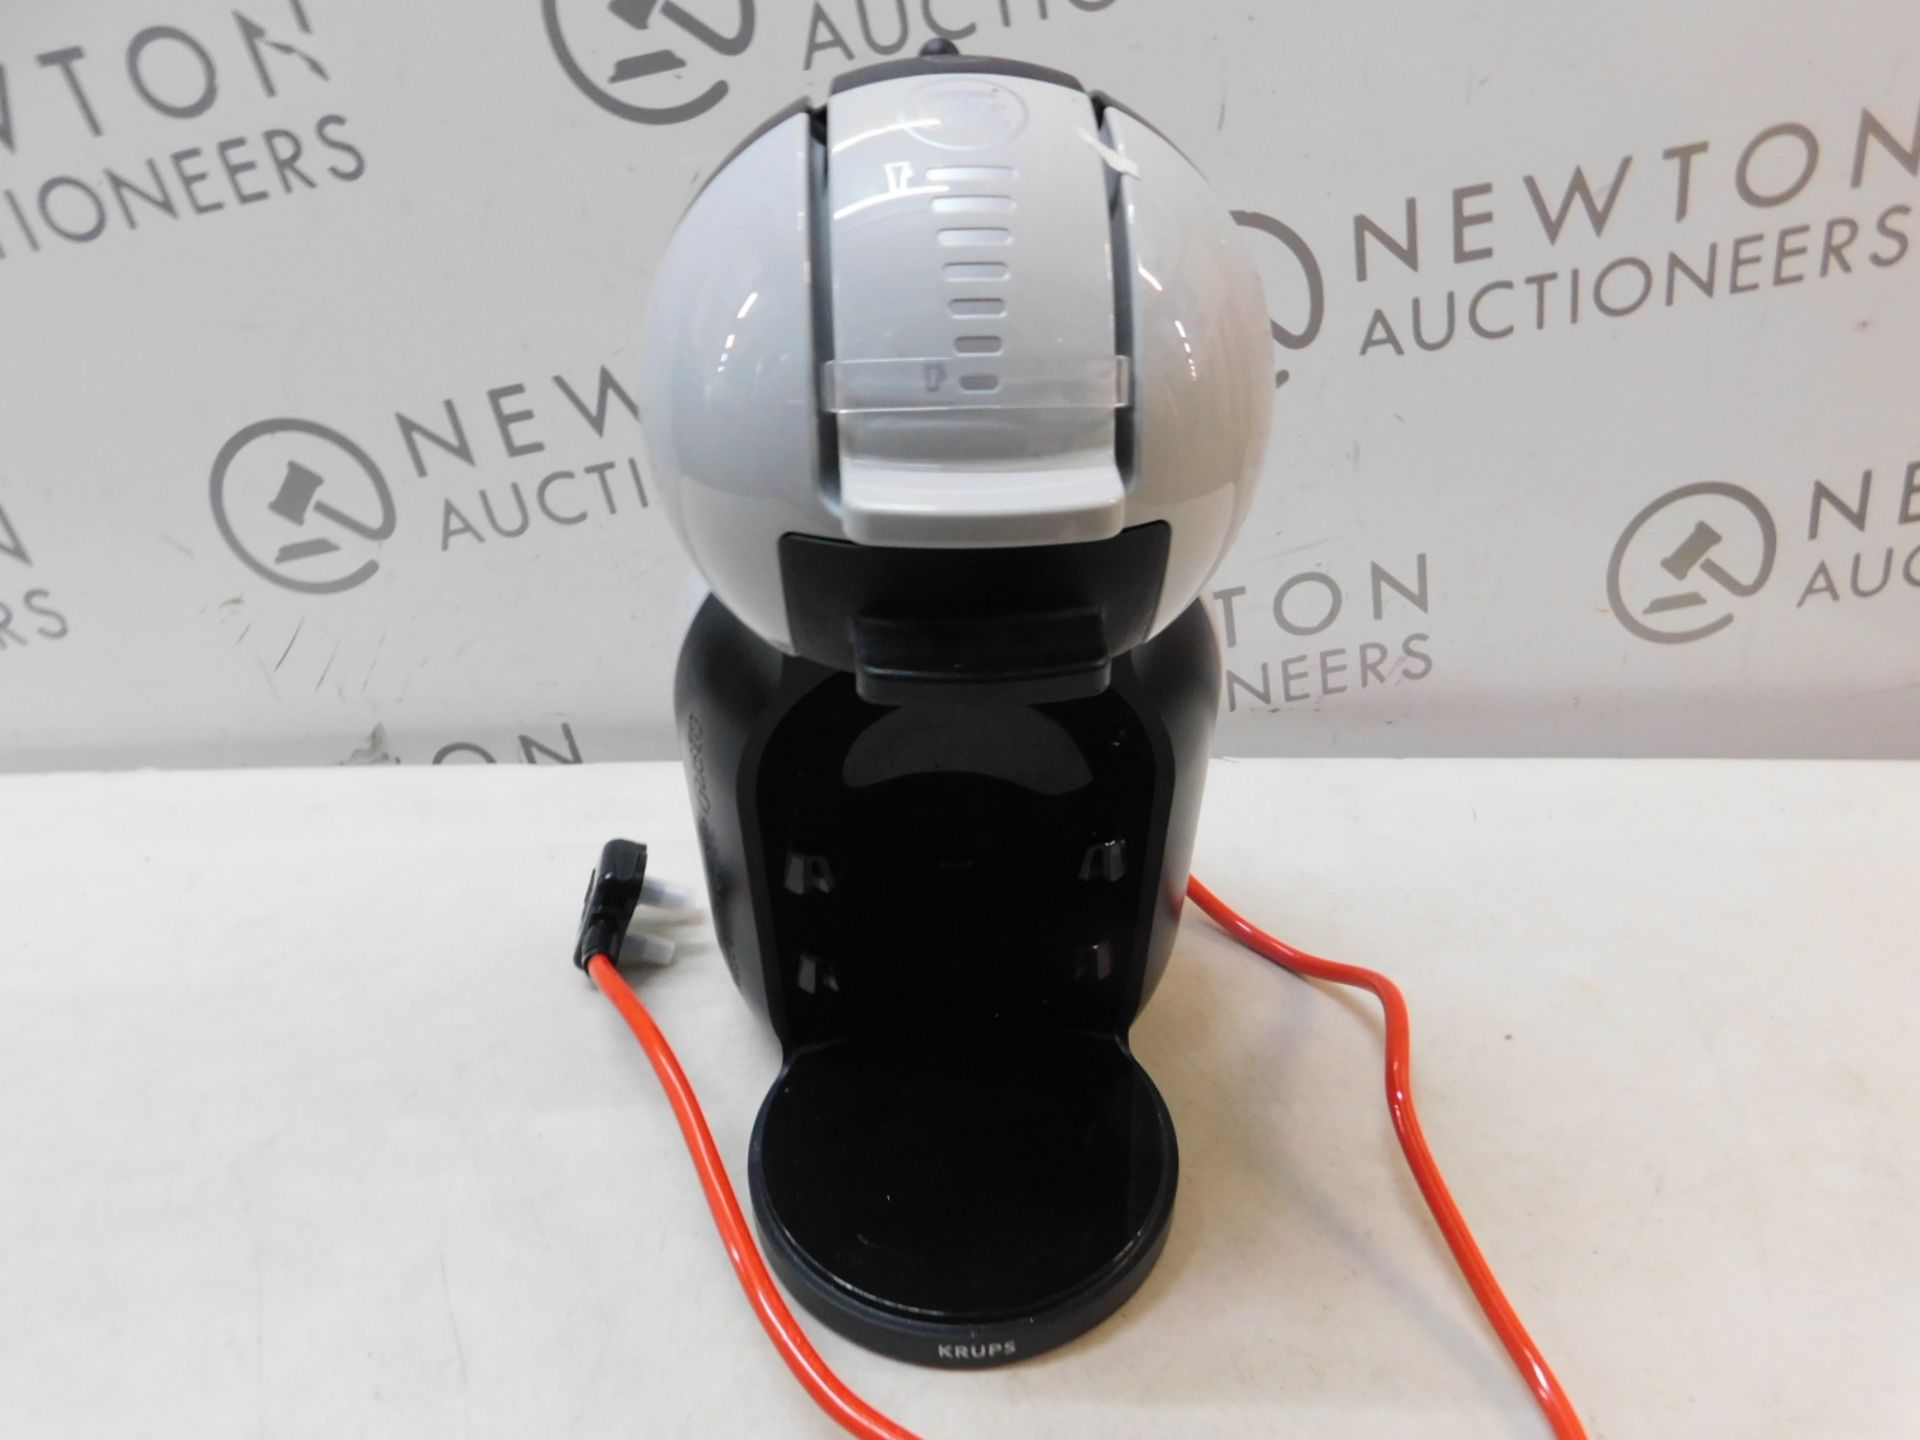 1 NESCAFE DOLCE GUSTO INFINISSIMA AUTOMATIC COFFEE POD MACHINE BY KRUPS RRP Â£114.99